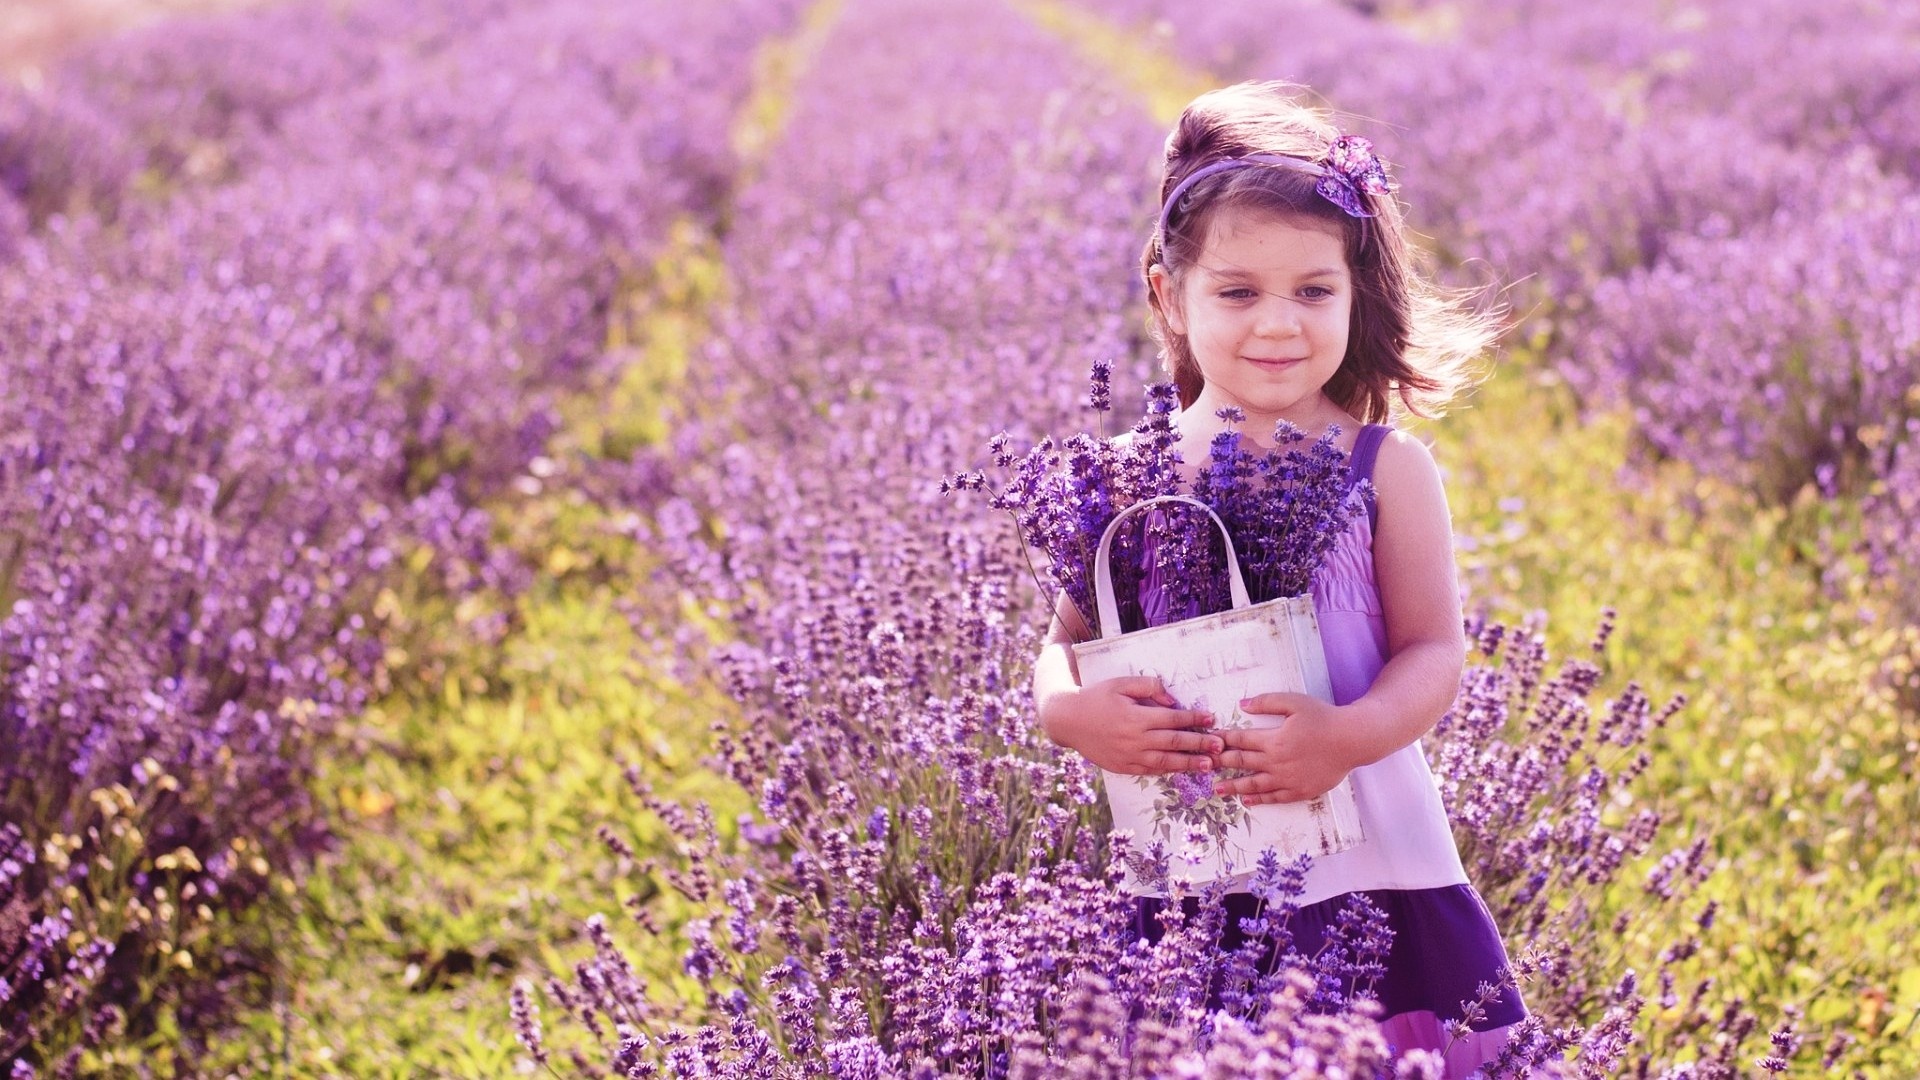 Lavender Flowers Background   Wallpaper High Definition High Quality 1920x1080